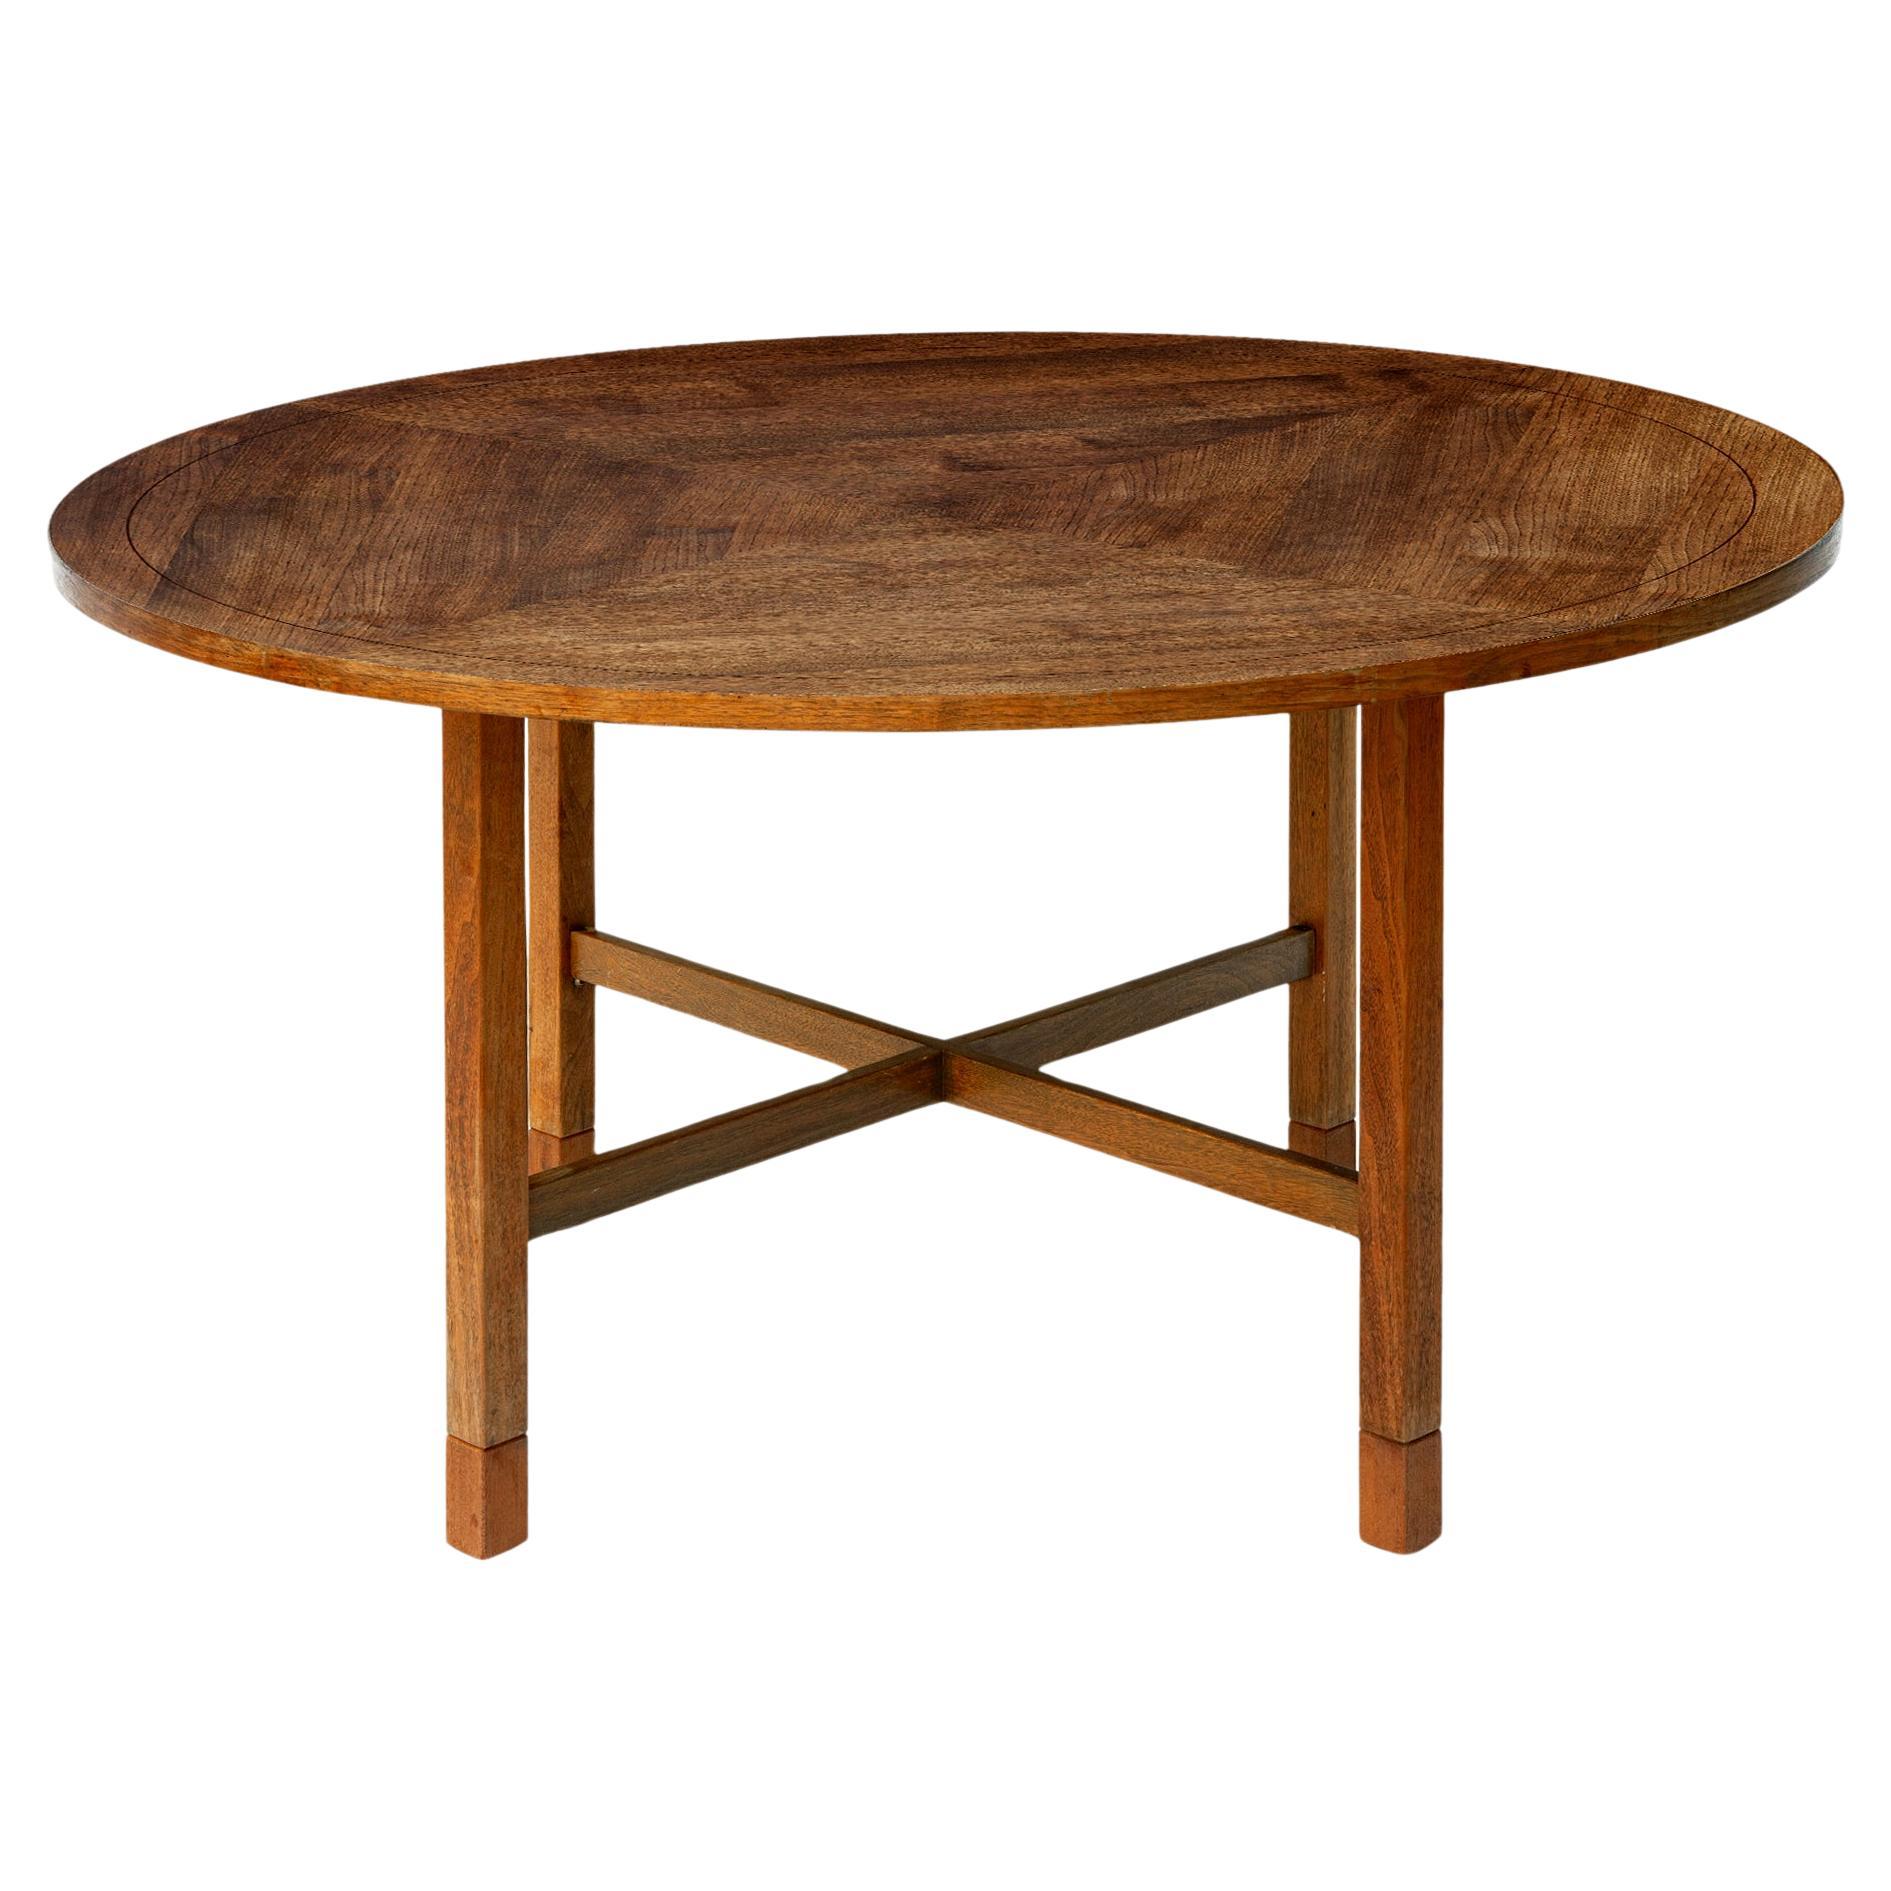 Danish Modern Mid-Century round table which has segmented top with four panels in teak veneers. 
The legs are straight with cross bar stretchers.